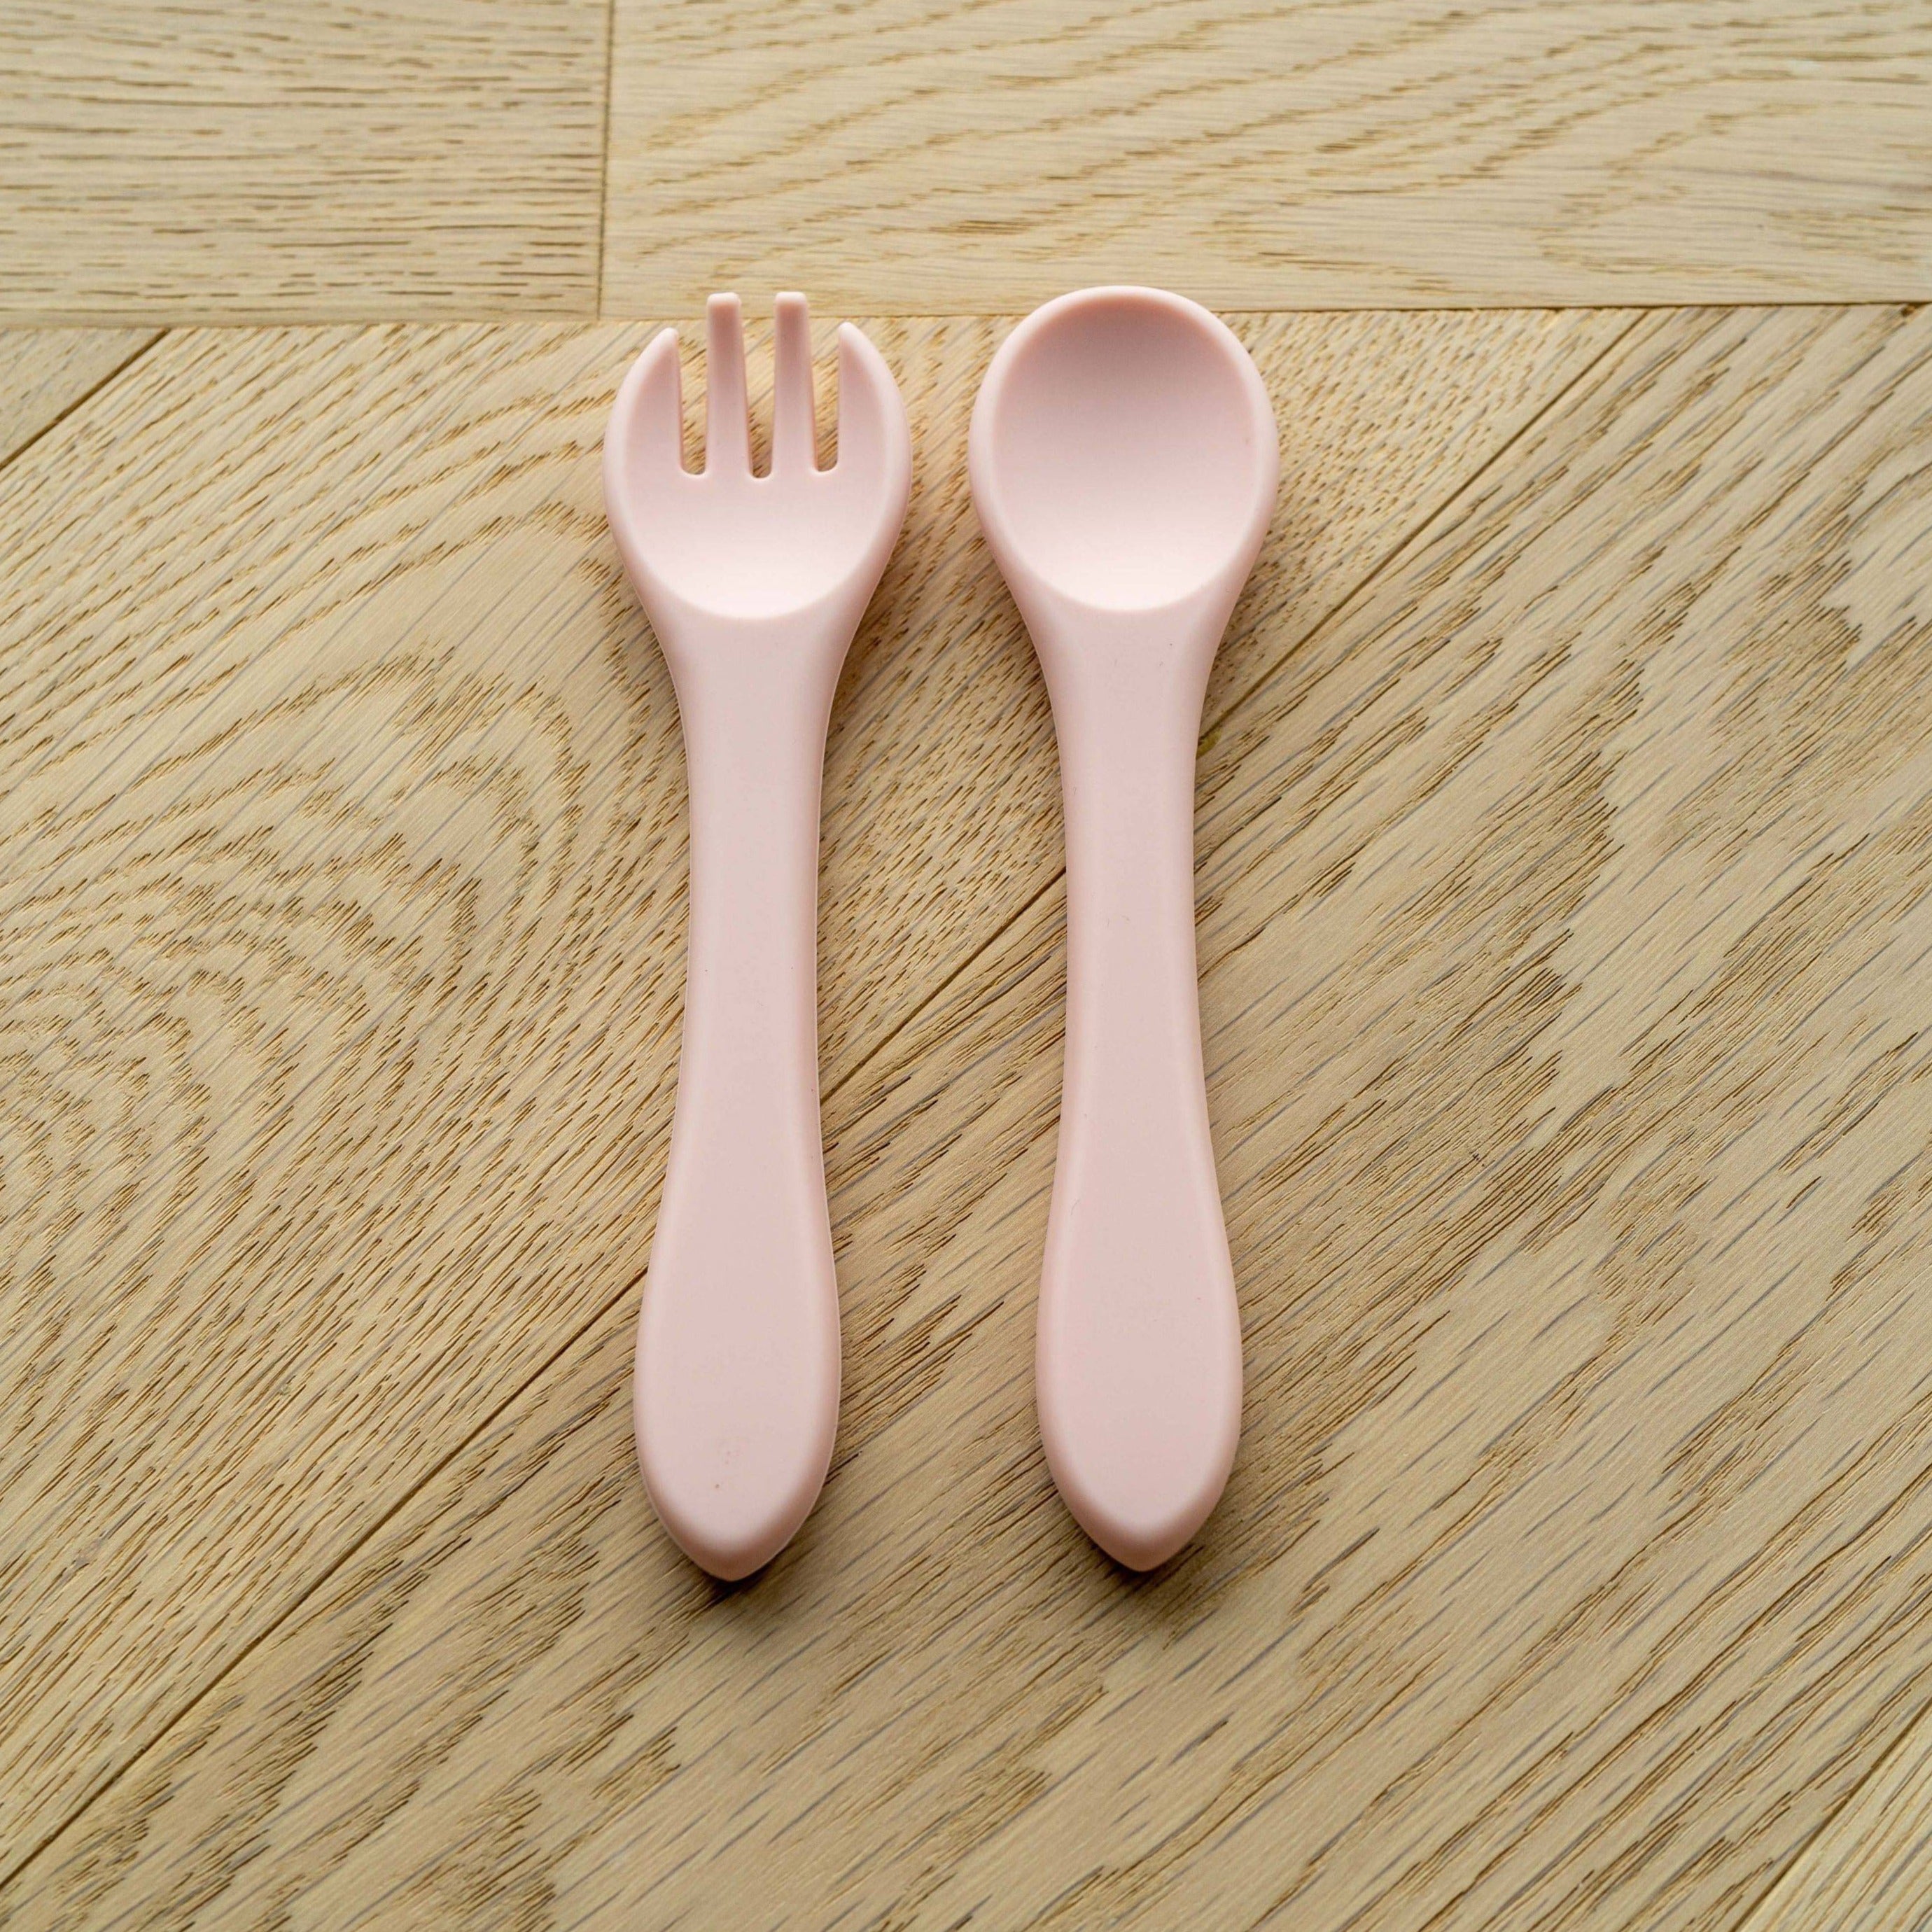 Mabel & Fox - Silicone Tableware - Spoon & Fork Set - Pink